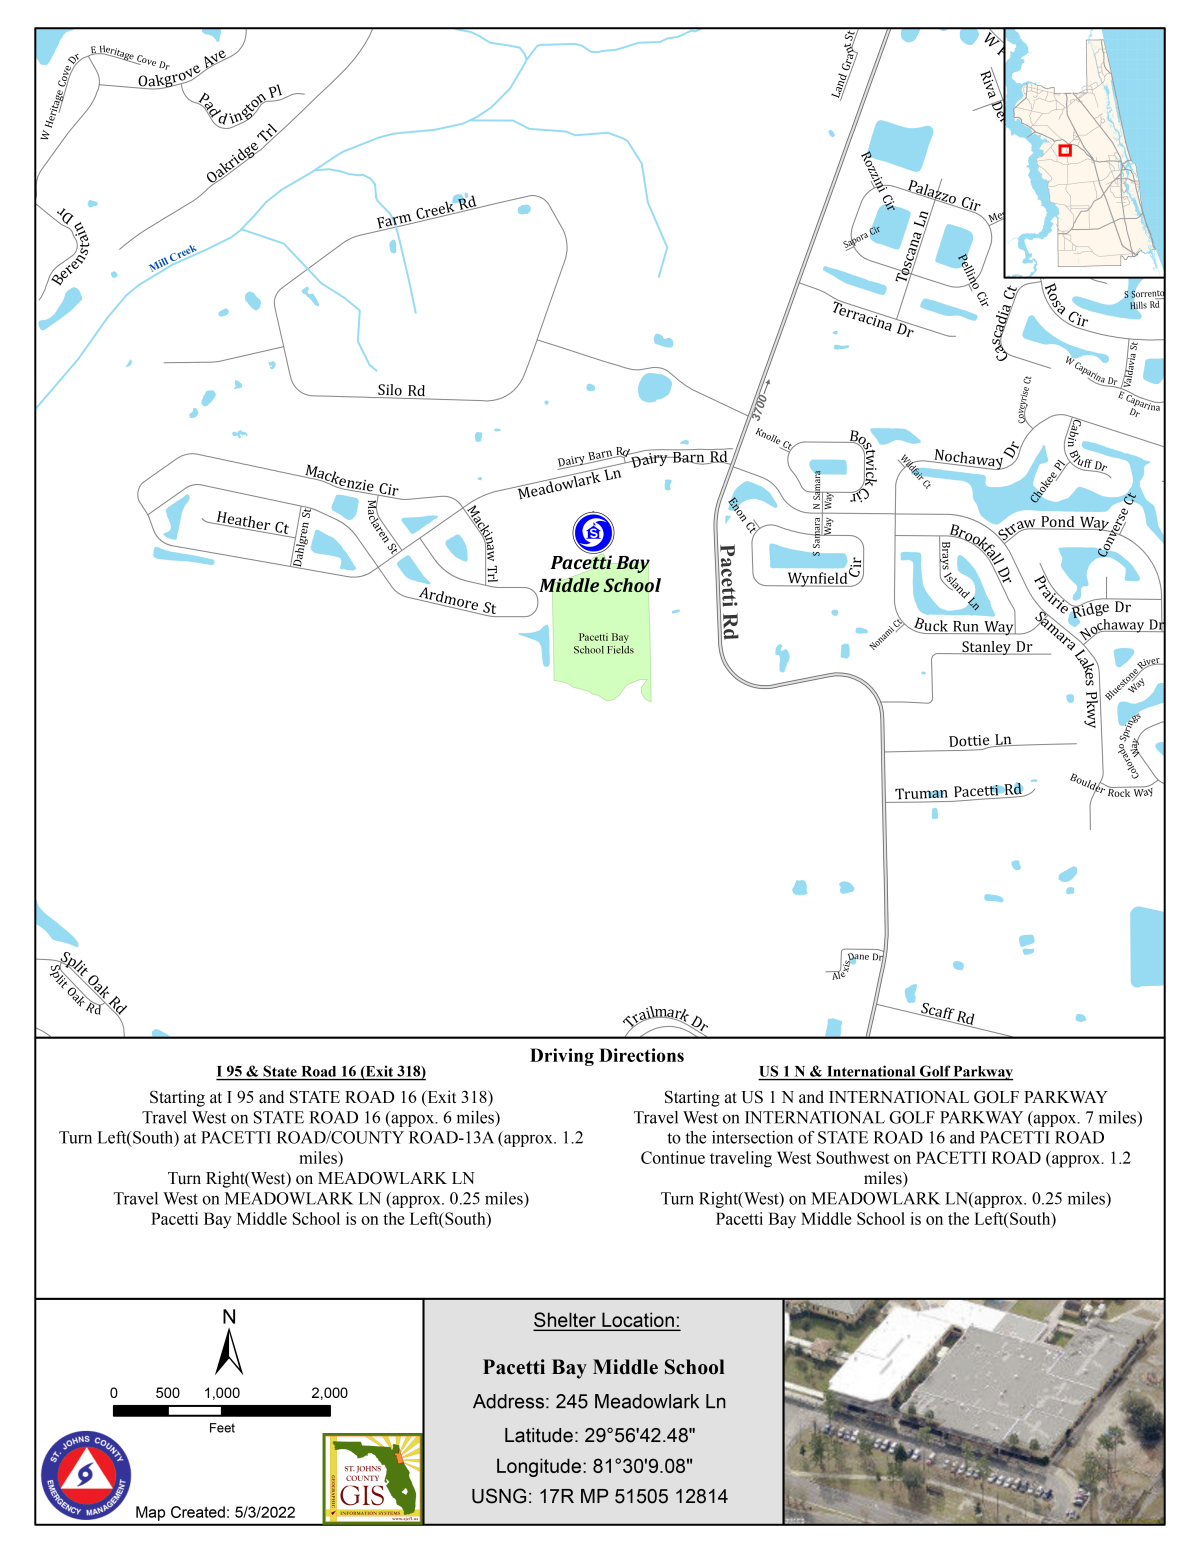 Special Needs shelter map - Pacetti Bay Middle School - 245 Meadowlark Ln.